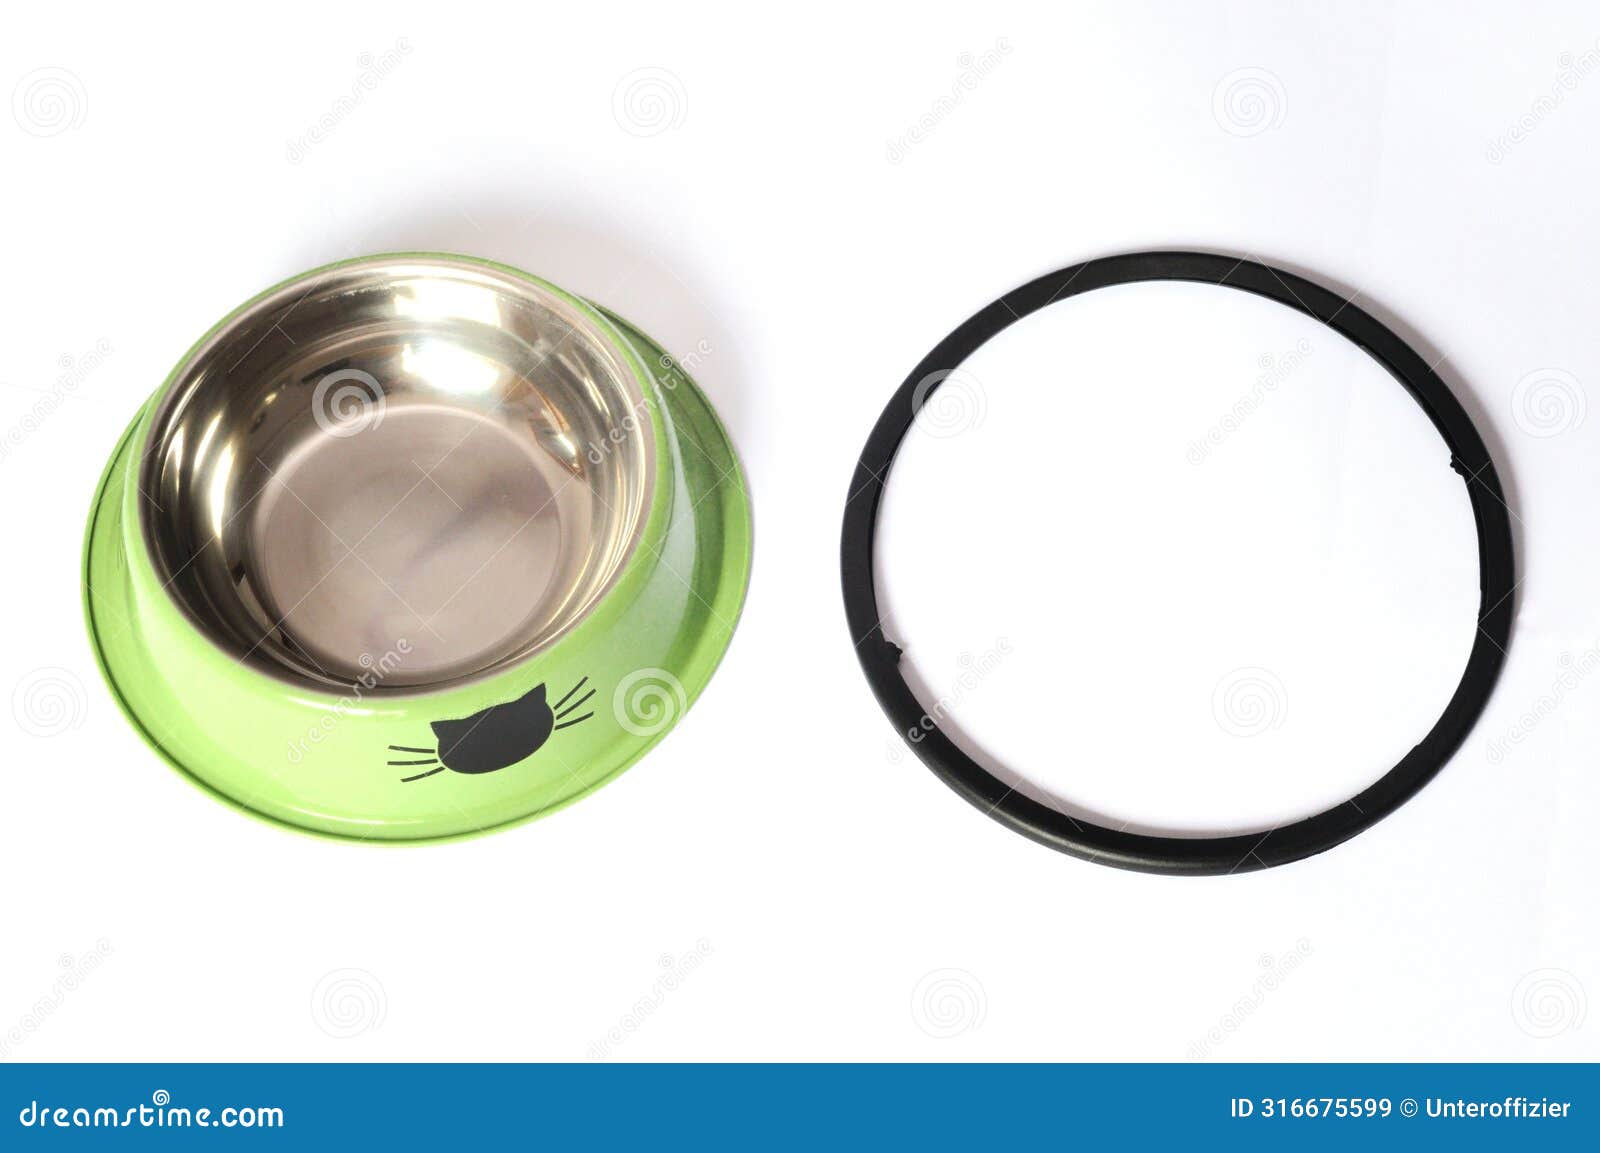 a green pet bowl with stopper removed and placed side by side white backdrop